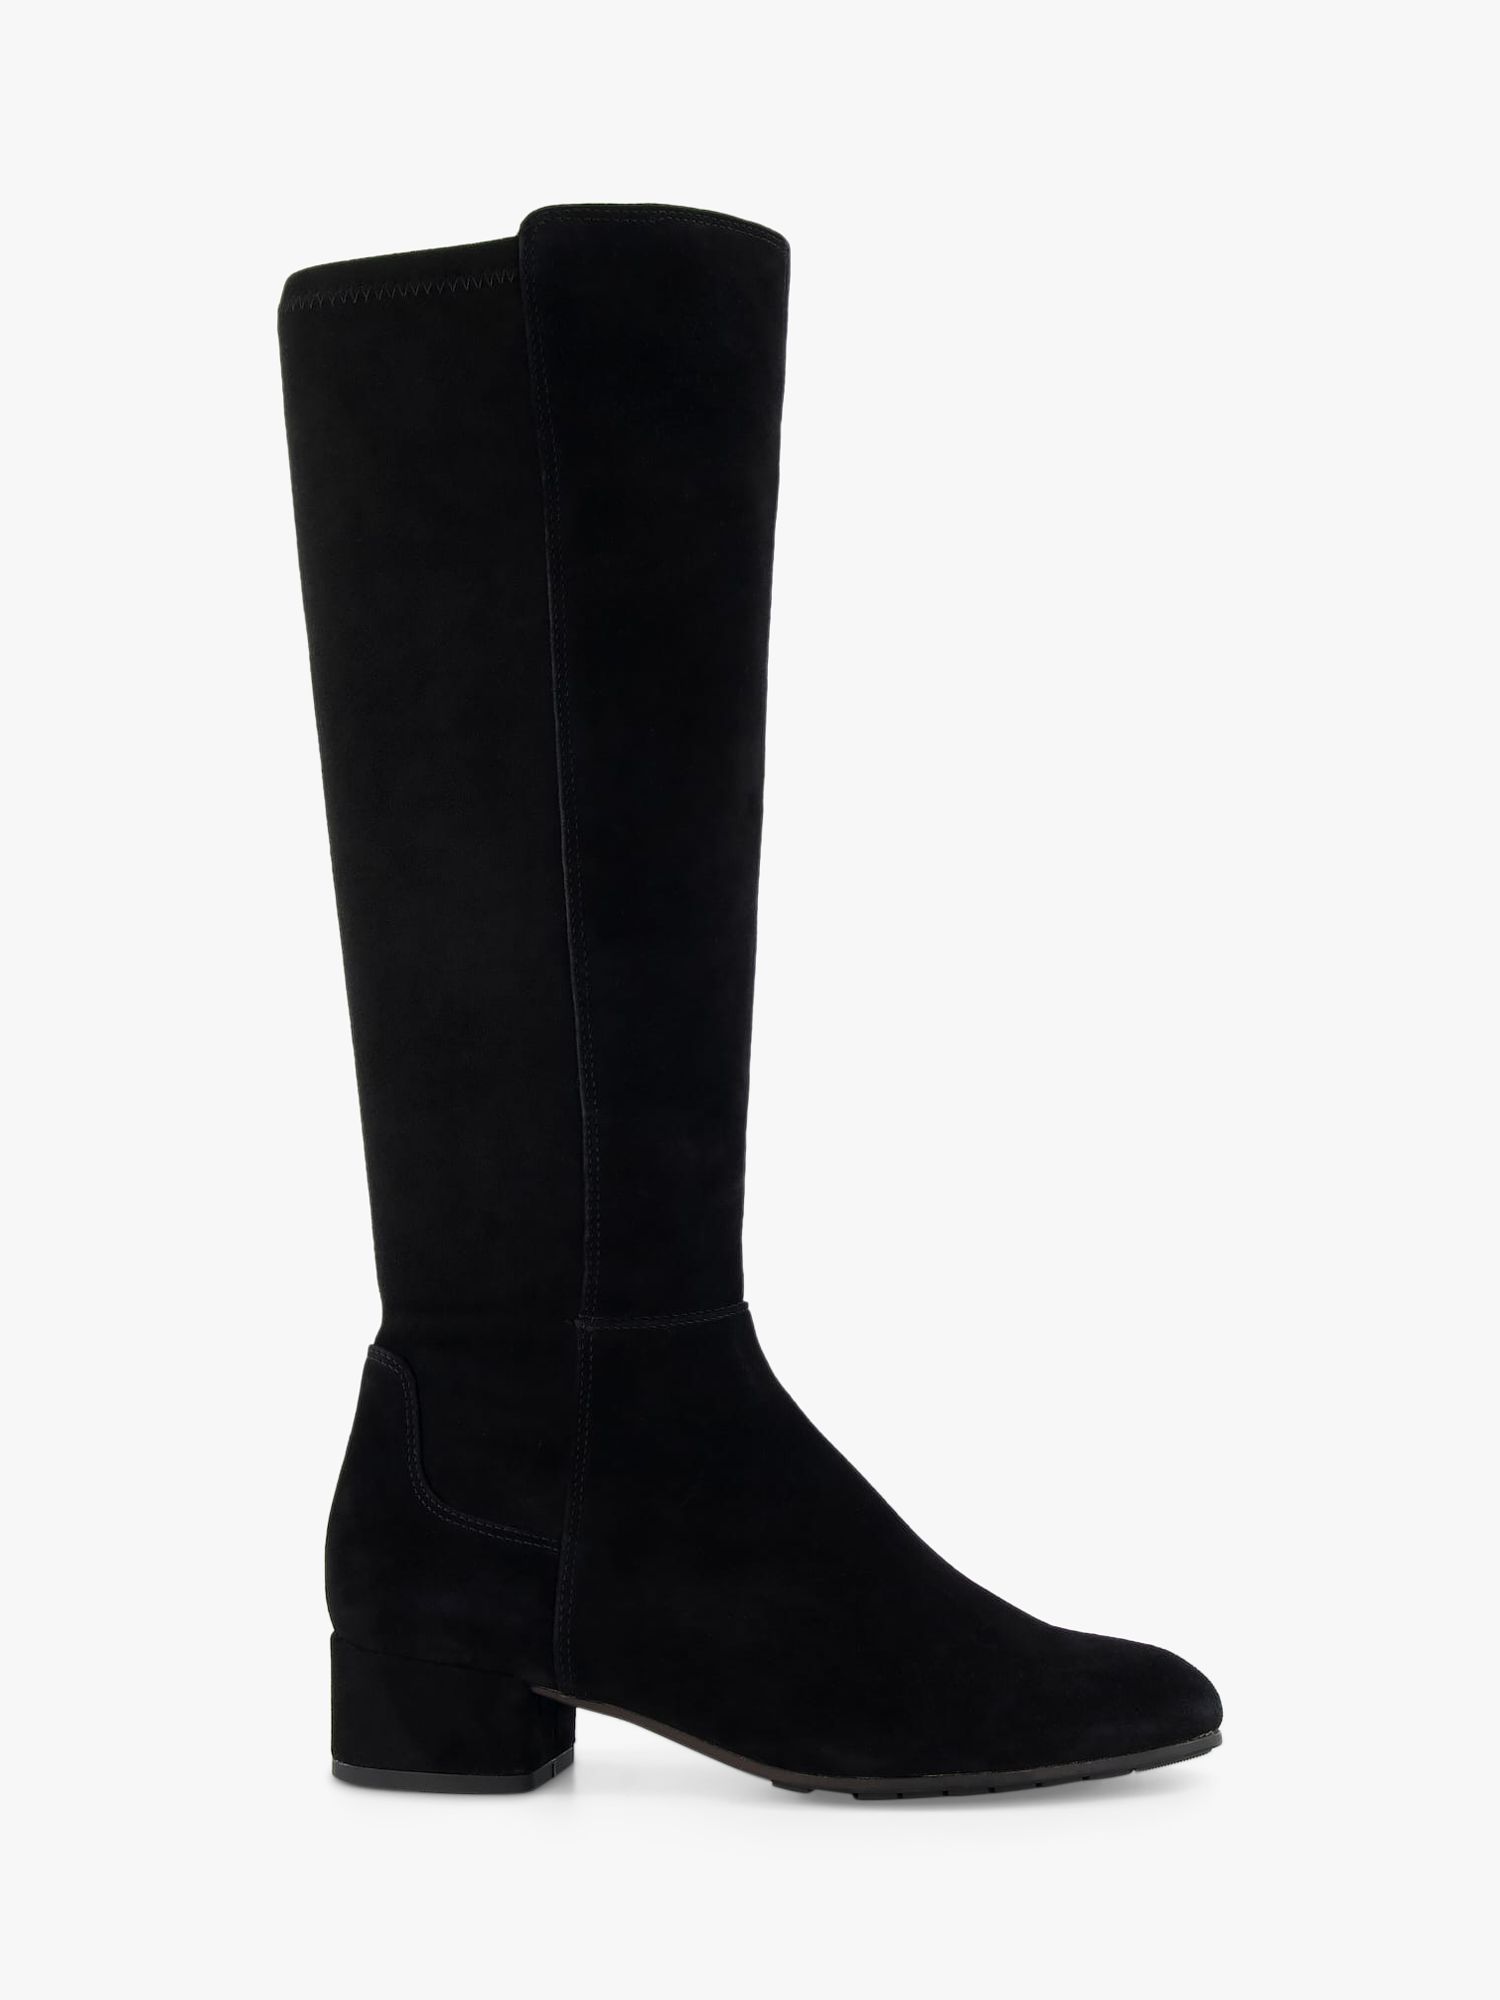 Dune Tayla Suede Knee High Boots, Black at John Lewis & Partners